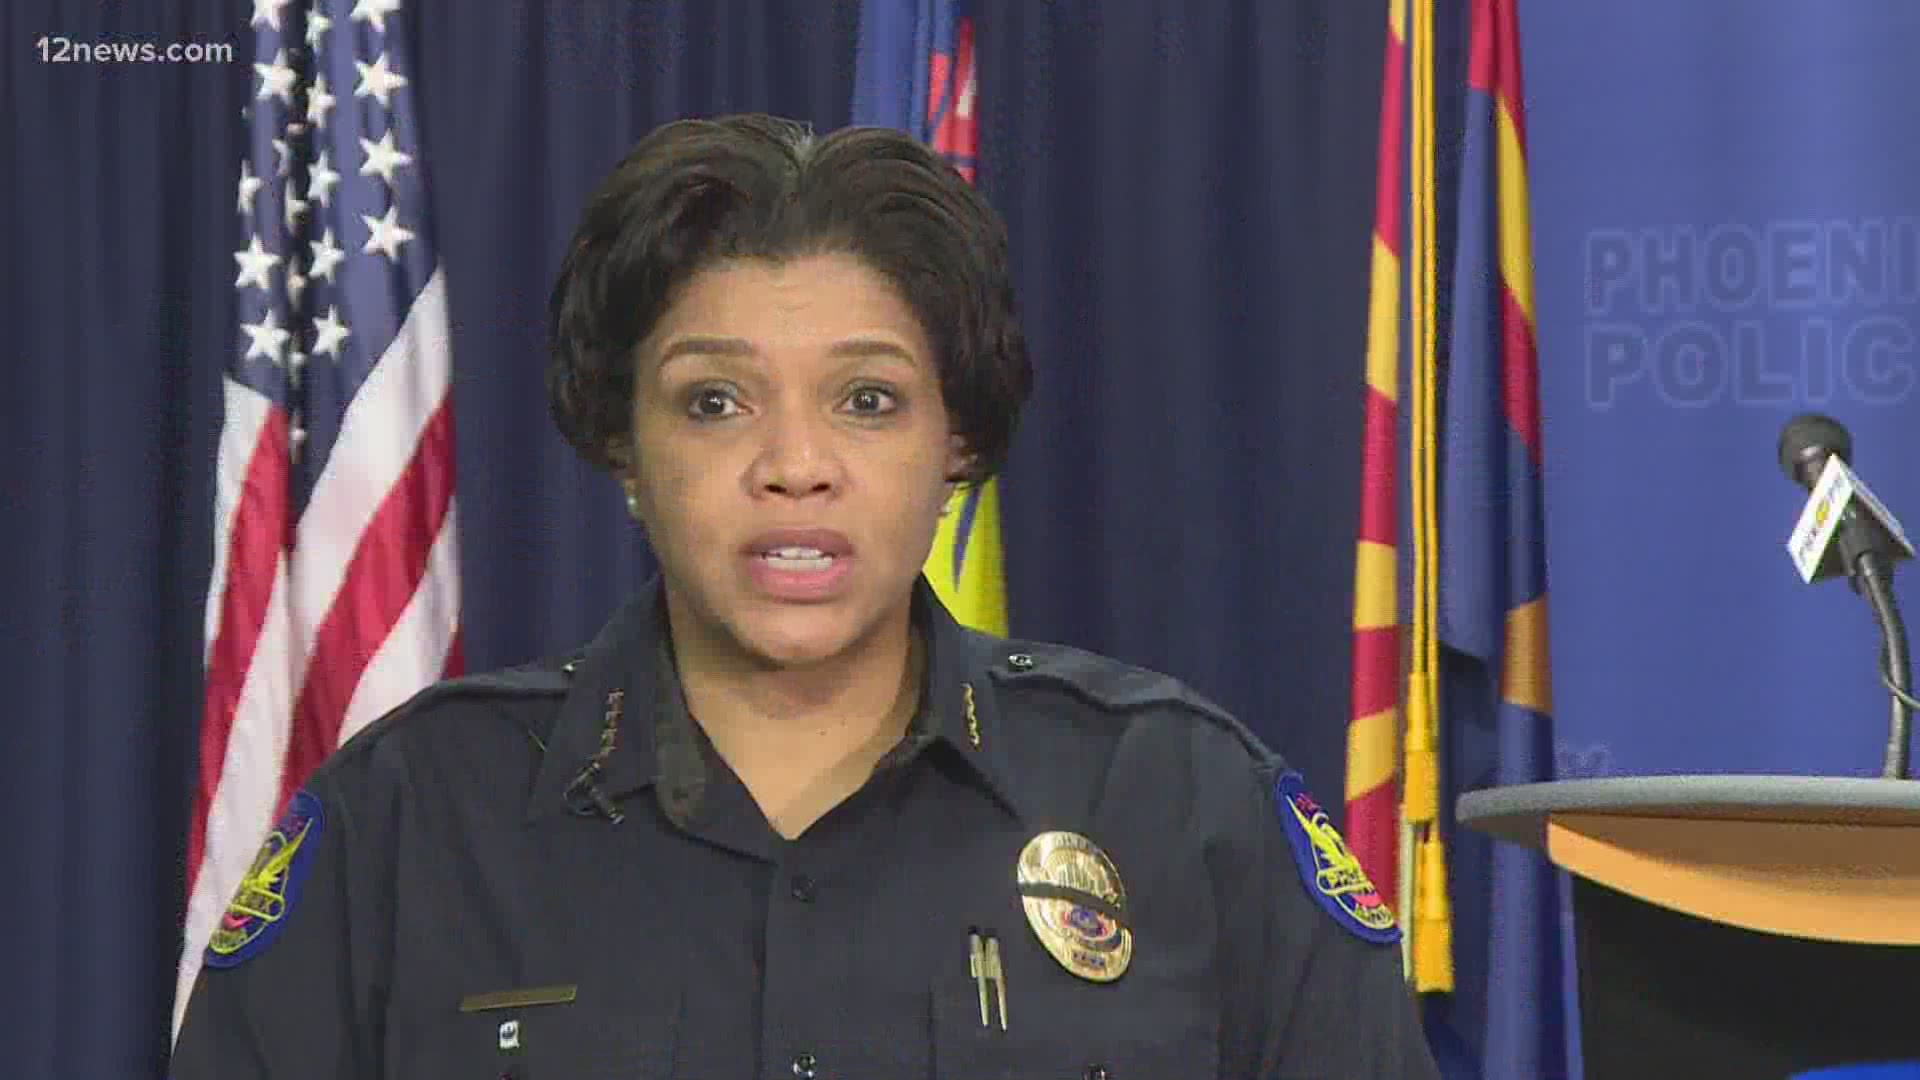 The Phoenix Police Department announced Chief Jeri Williams has tested positive for COVID-19. She is experiencing mild symptoms and is in quarantine, officials said.